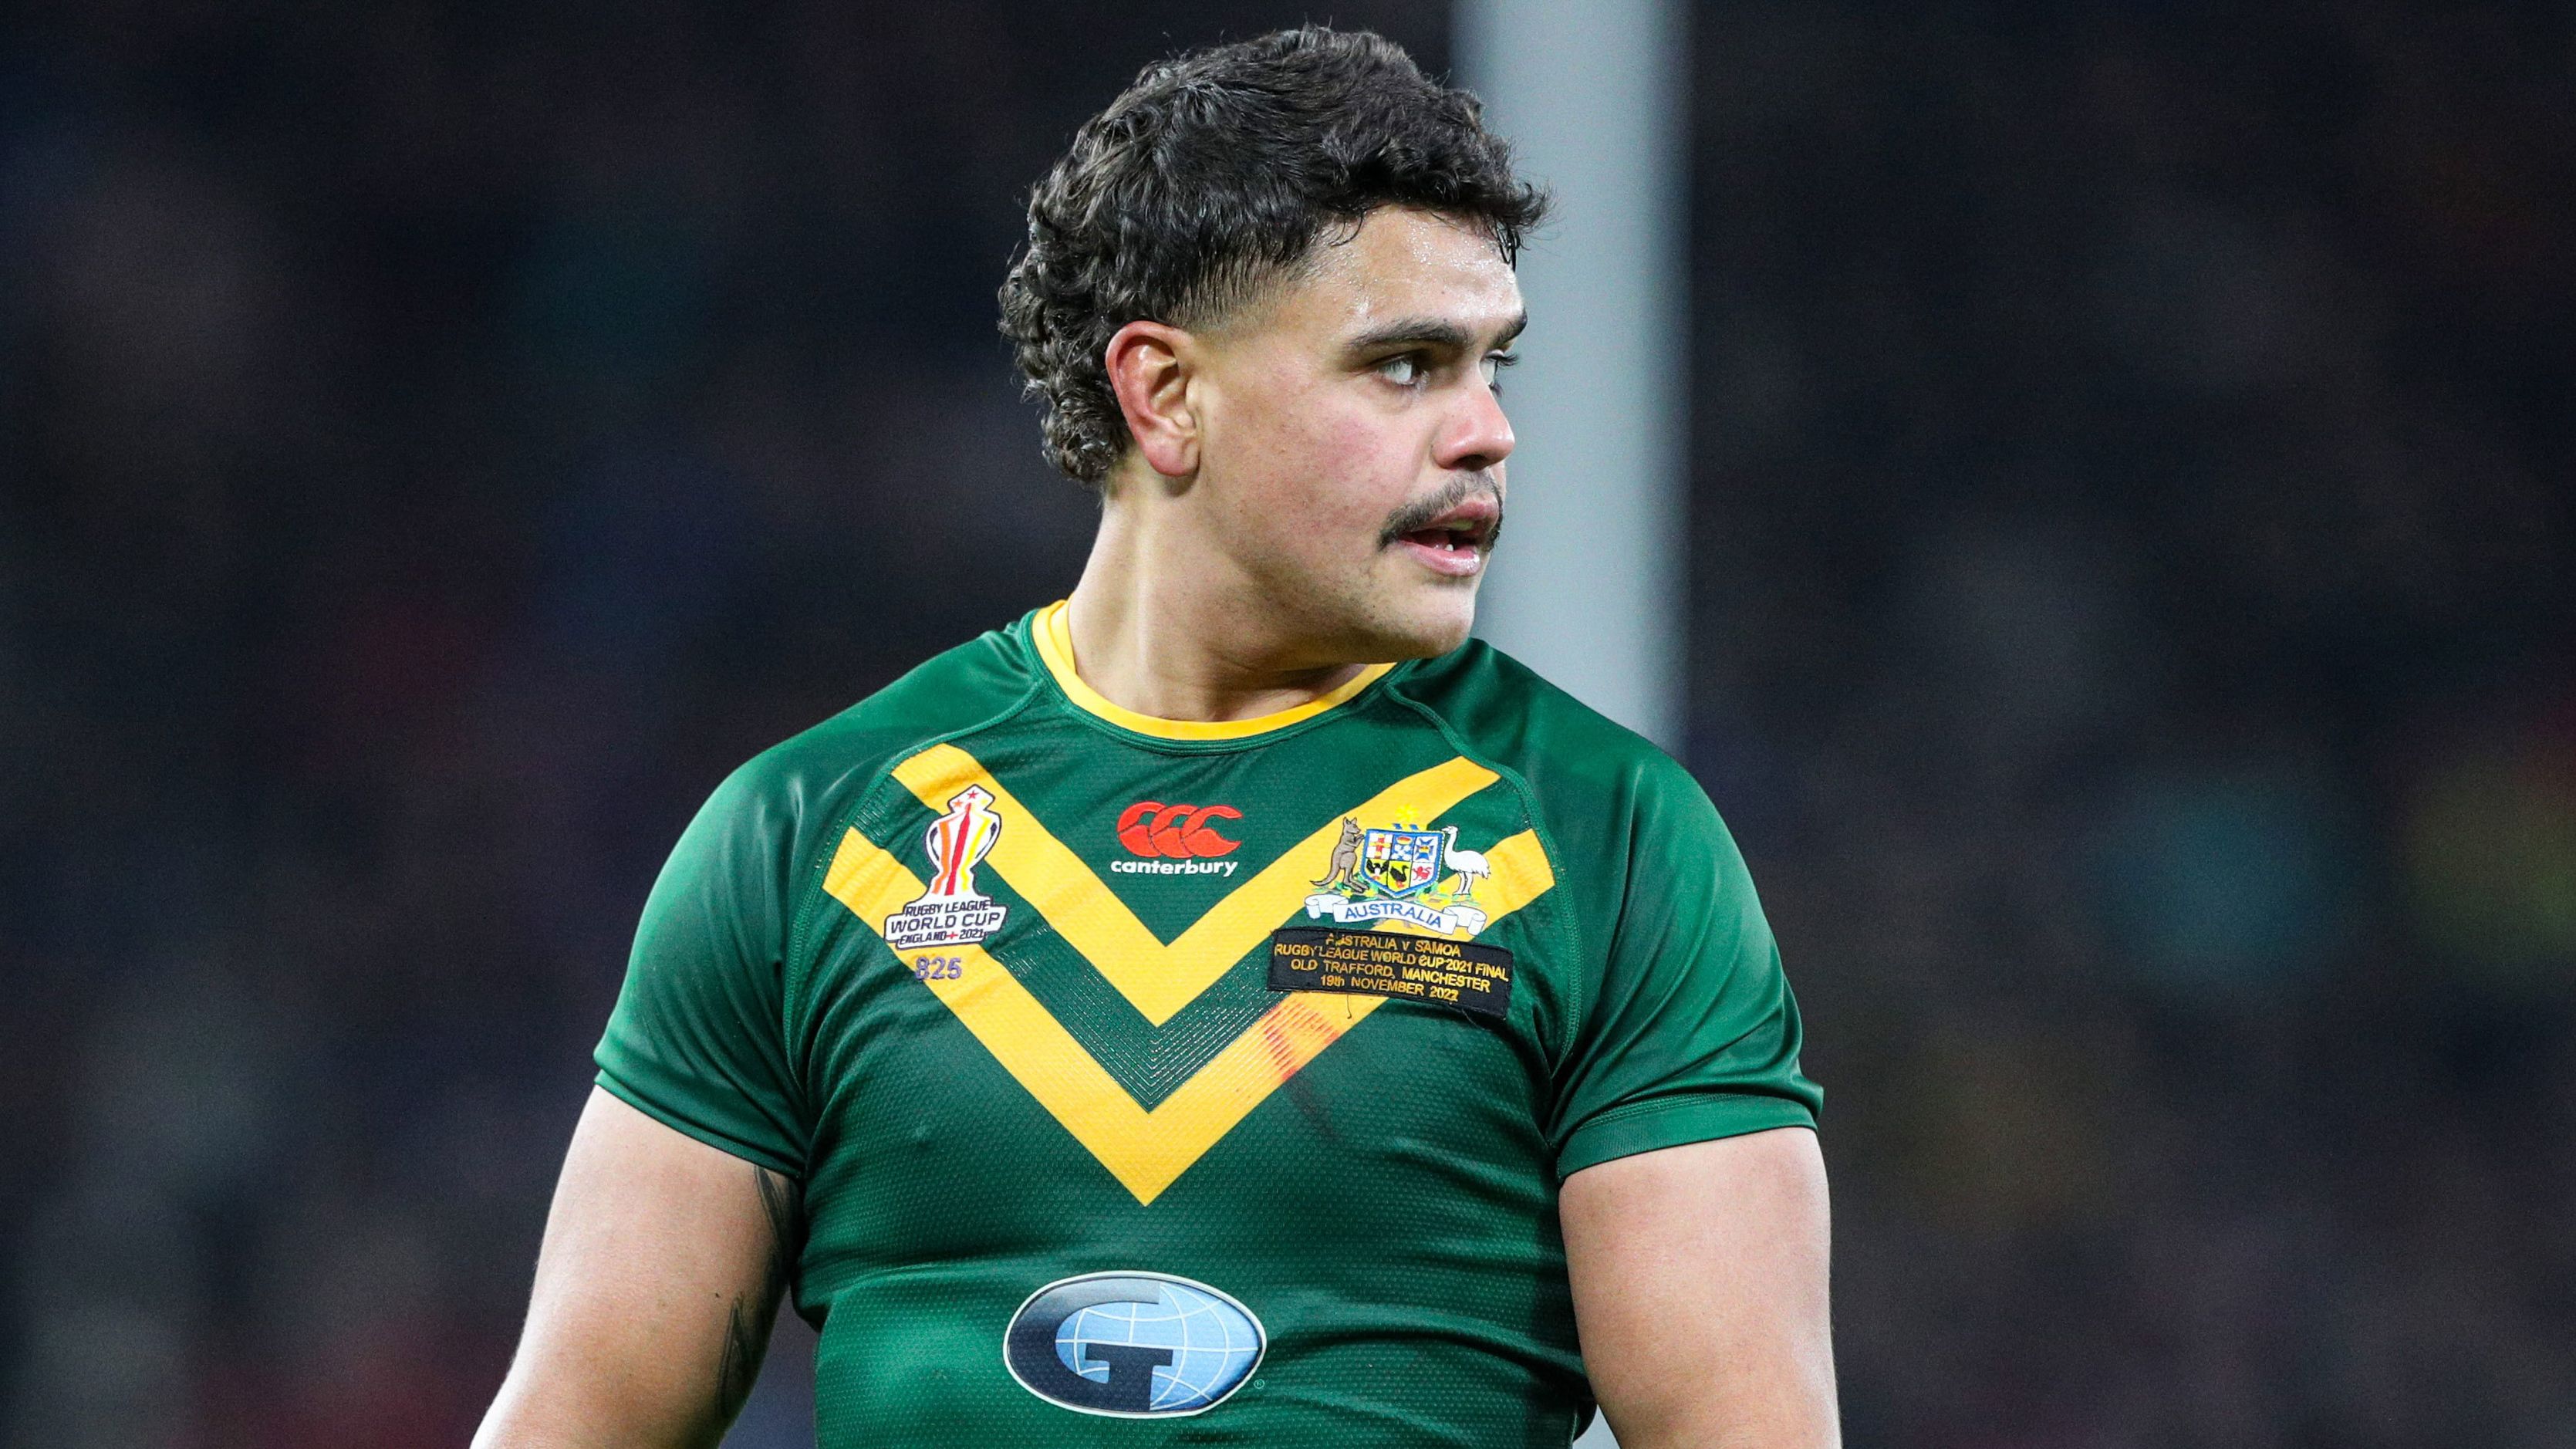 Latrell Mitchell in action during the Rugby League World Cup Final match between Australia and Samoa at Old Trafford. 